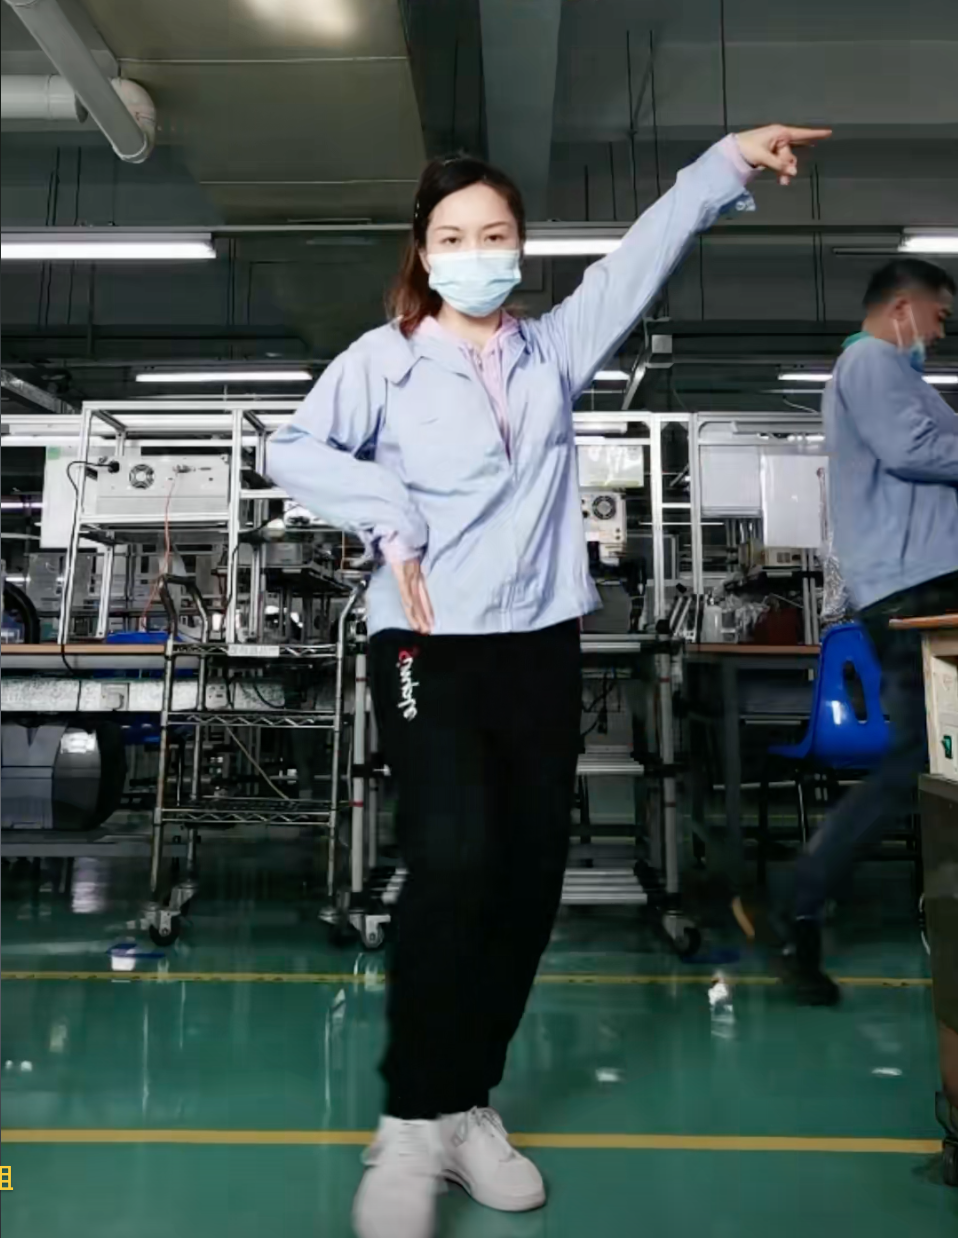 TRP Connector Worker Yi performs a dance on the factory floor